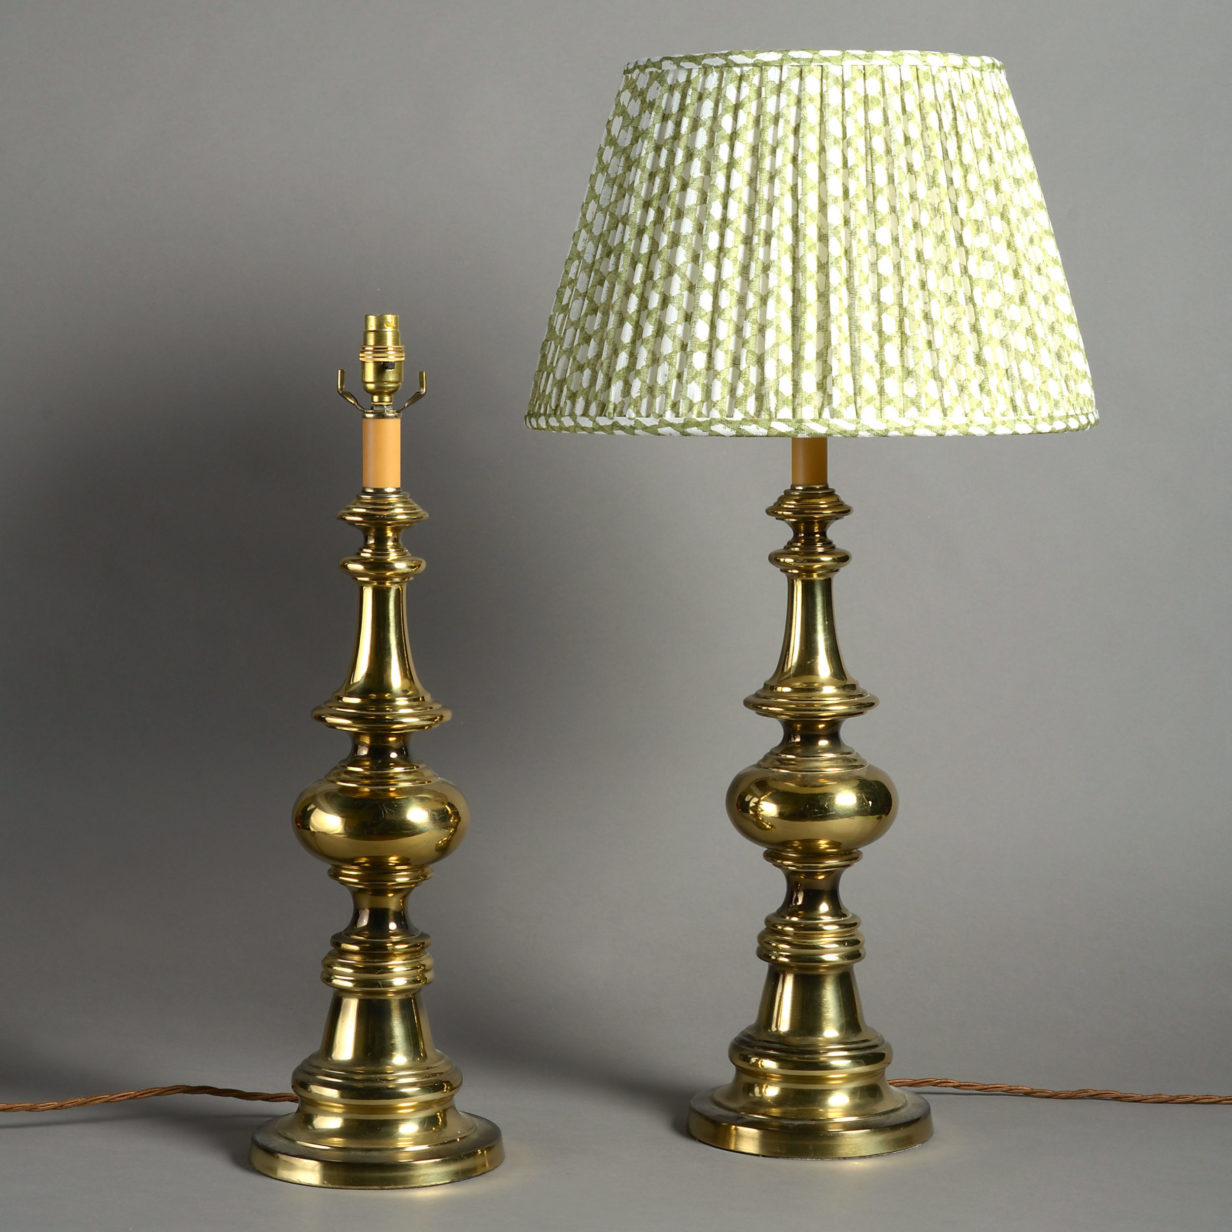 A large pair of mid 20th century brass table lamps